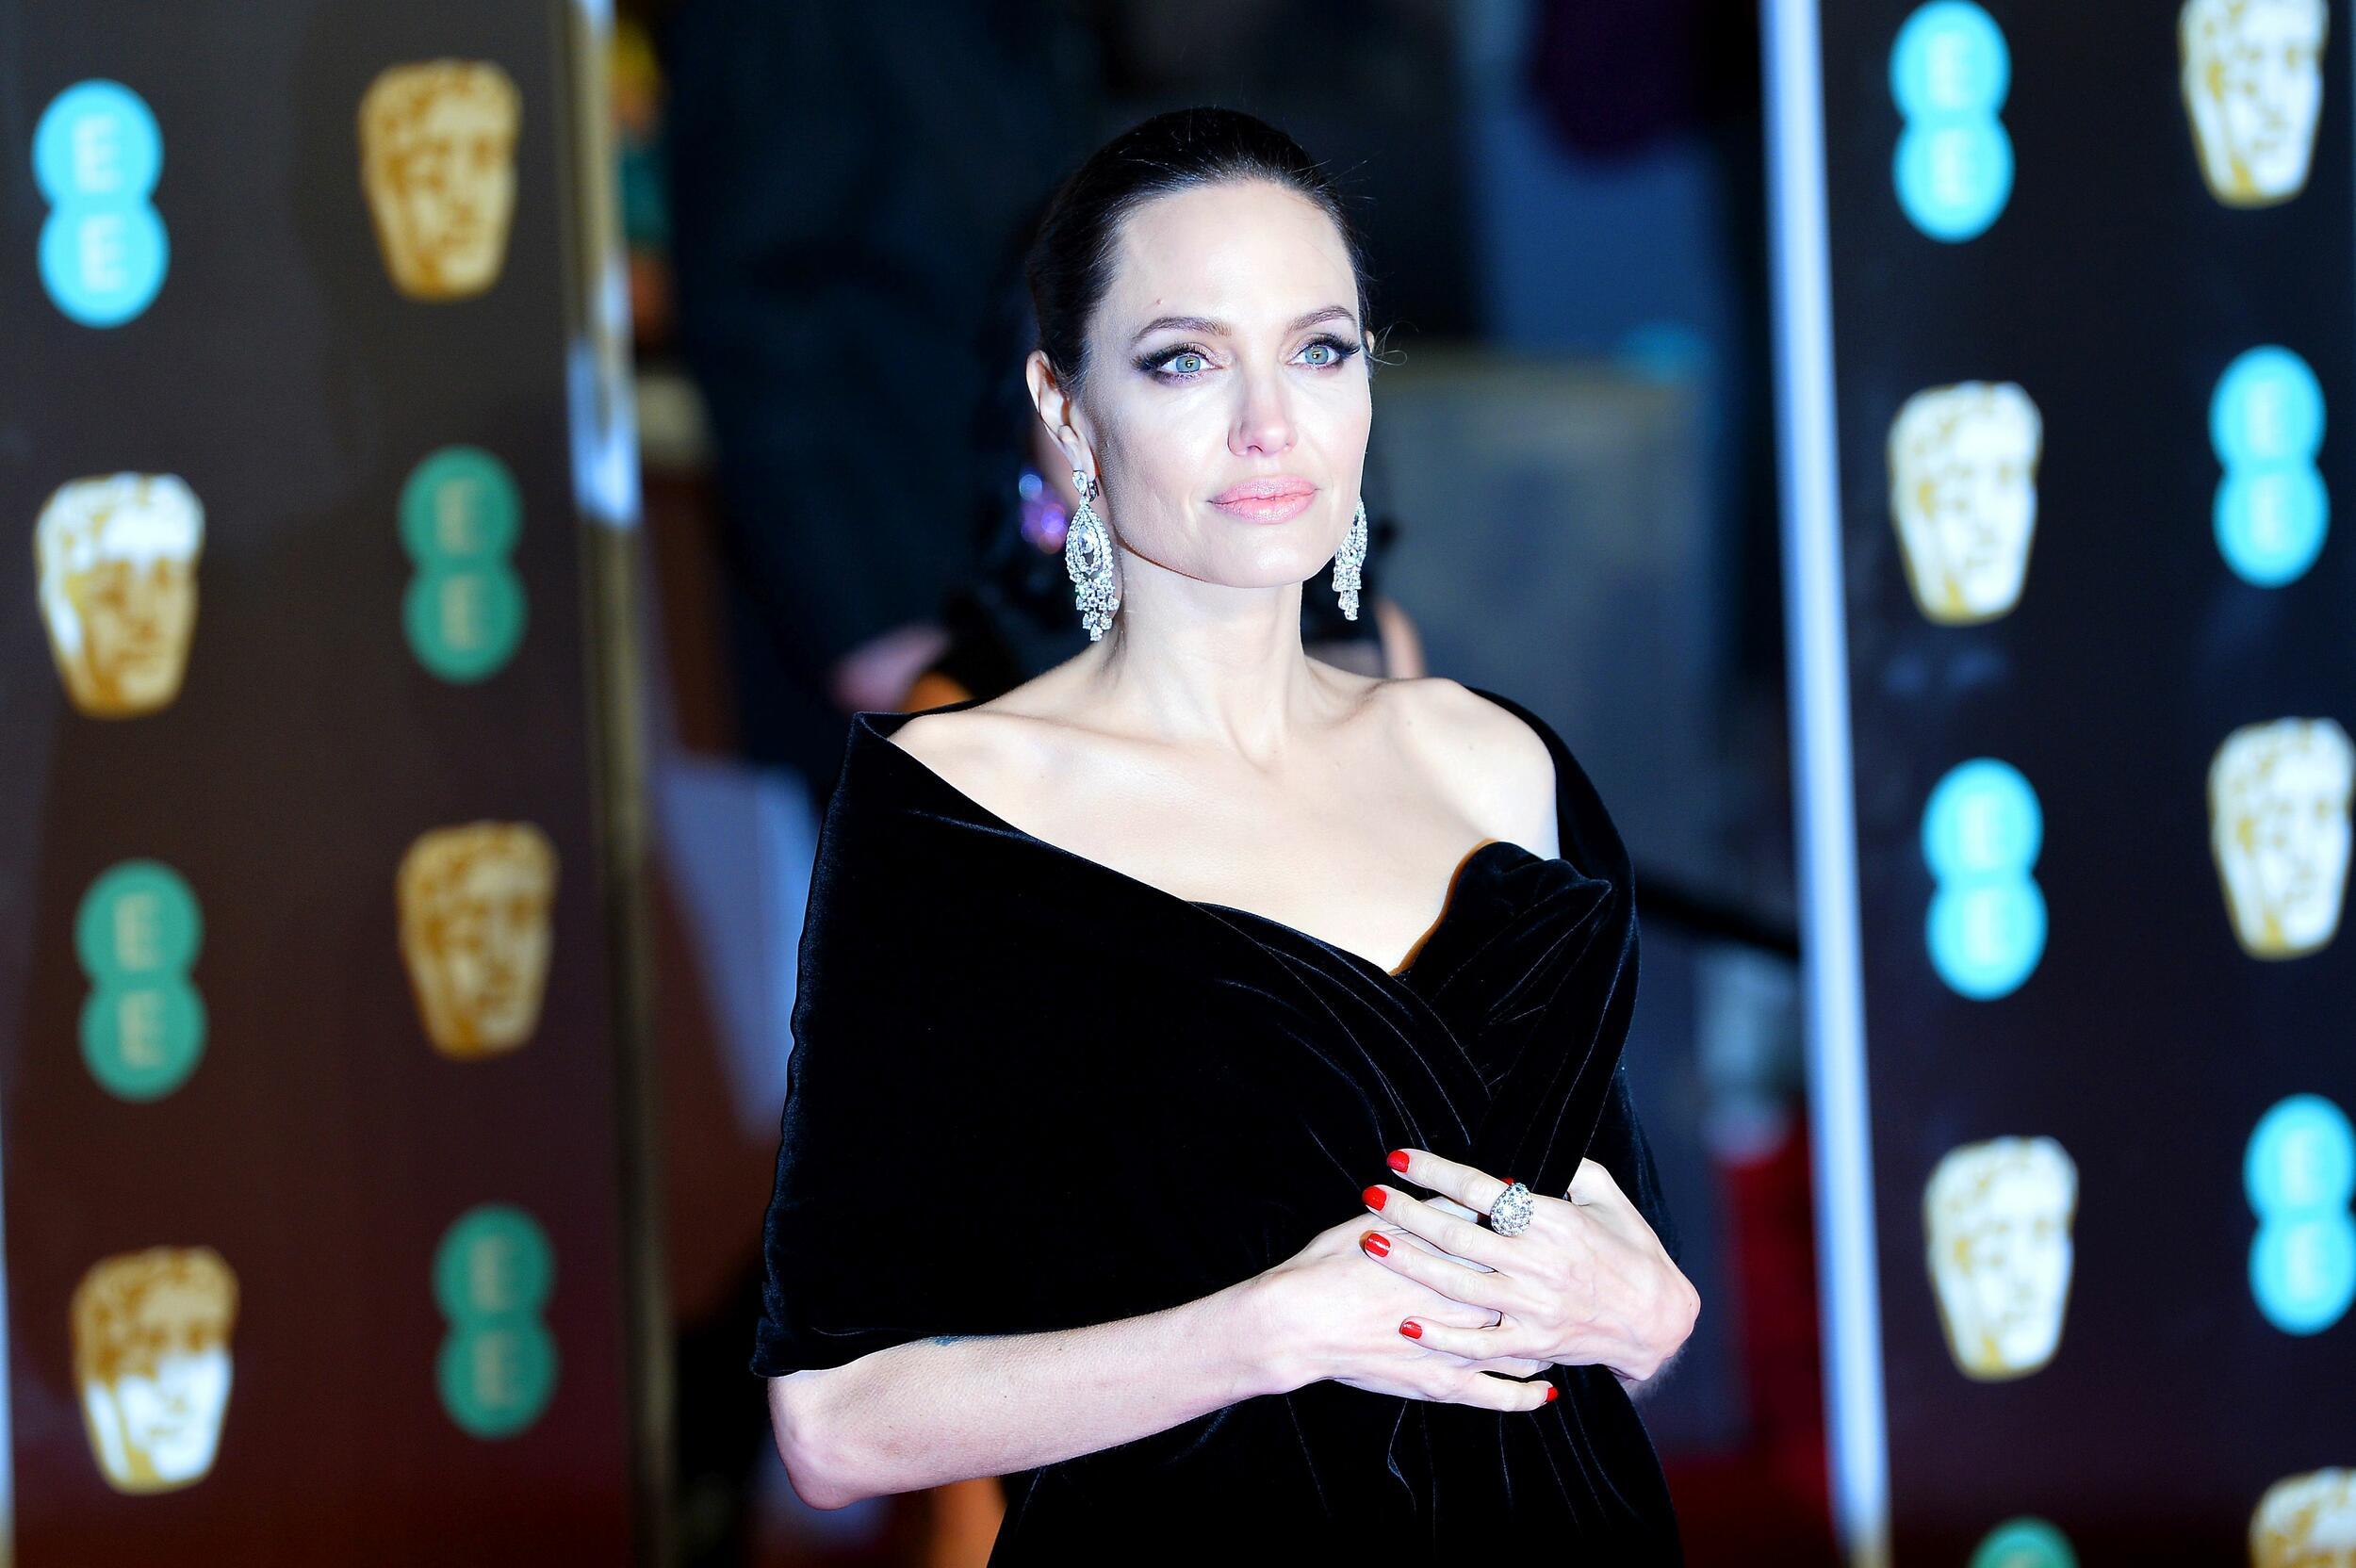 Anelina Doli, foto: Jeff Spicer/Jeff Spicer/Getty Images, Entertainment